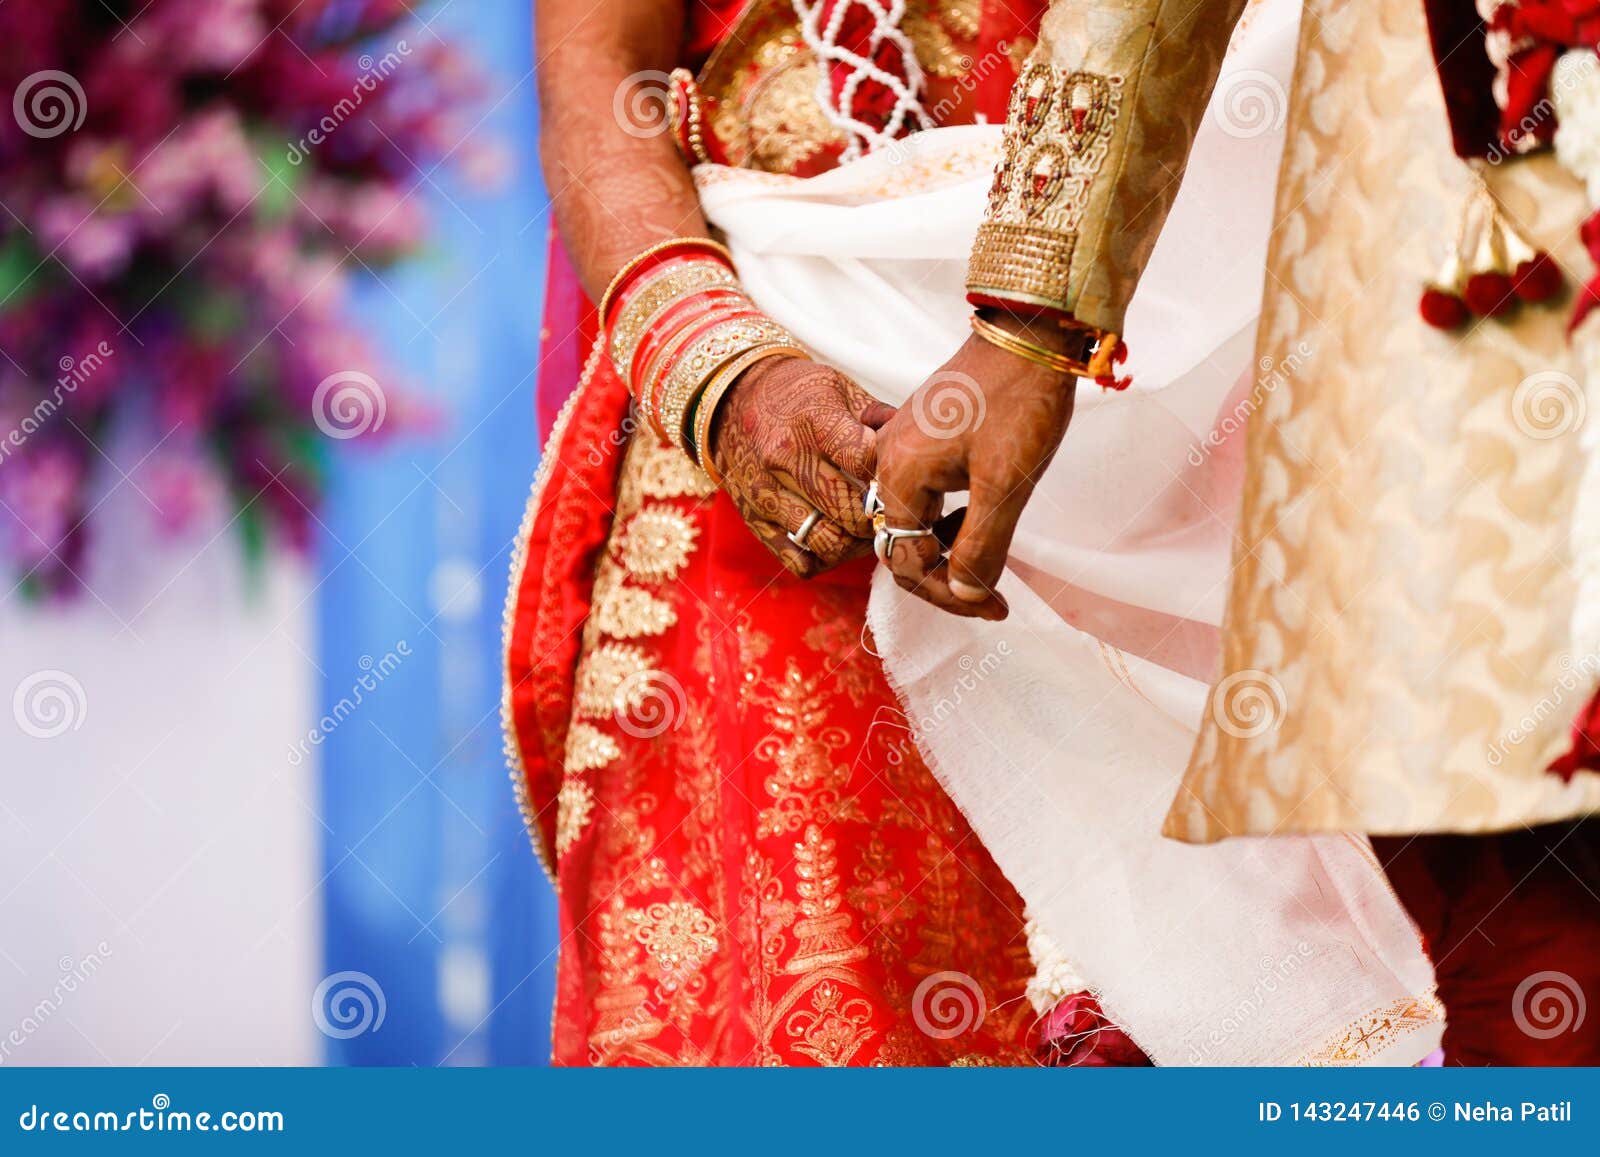 Indian Wedding Photography Groom And Bride Hands Stock Photo